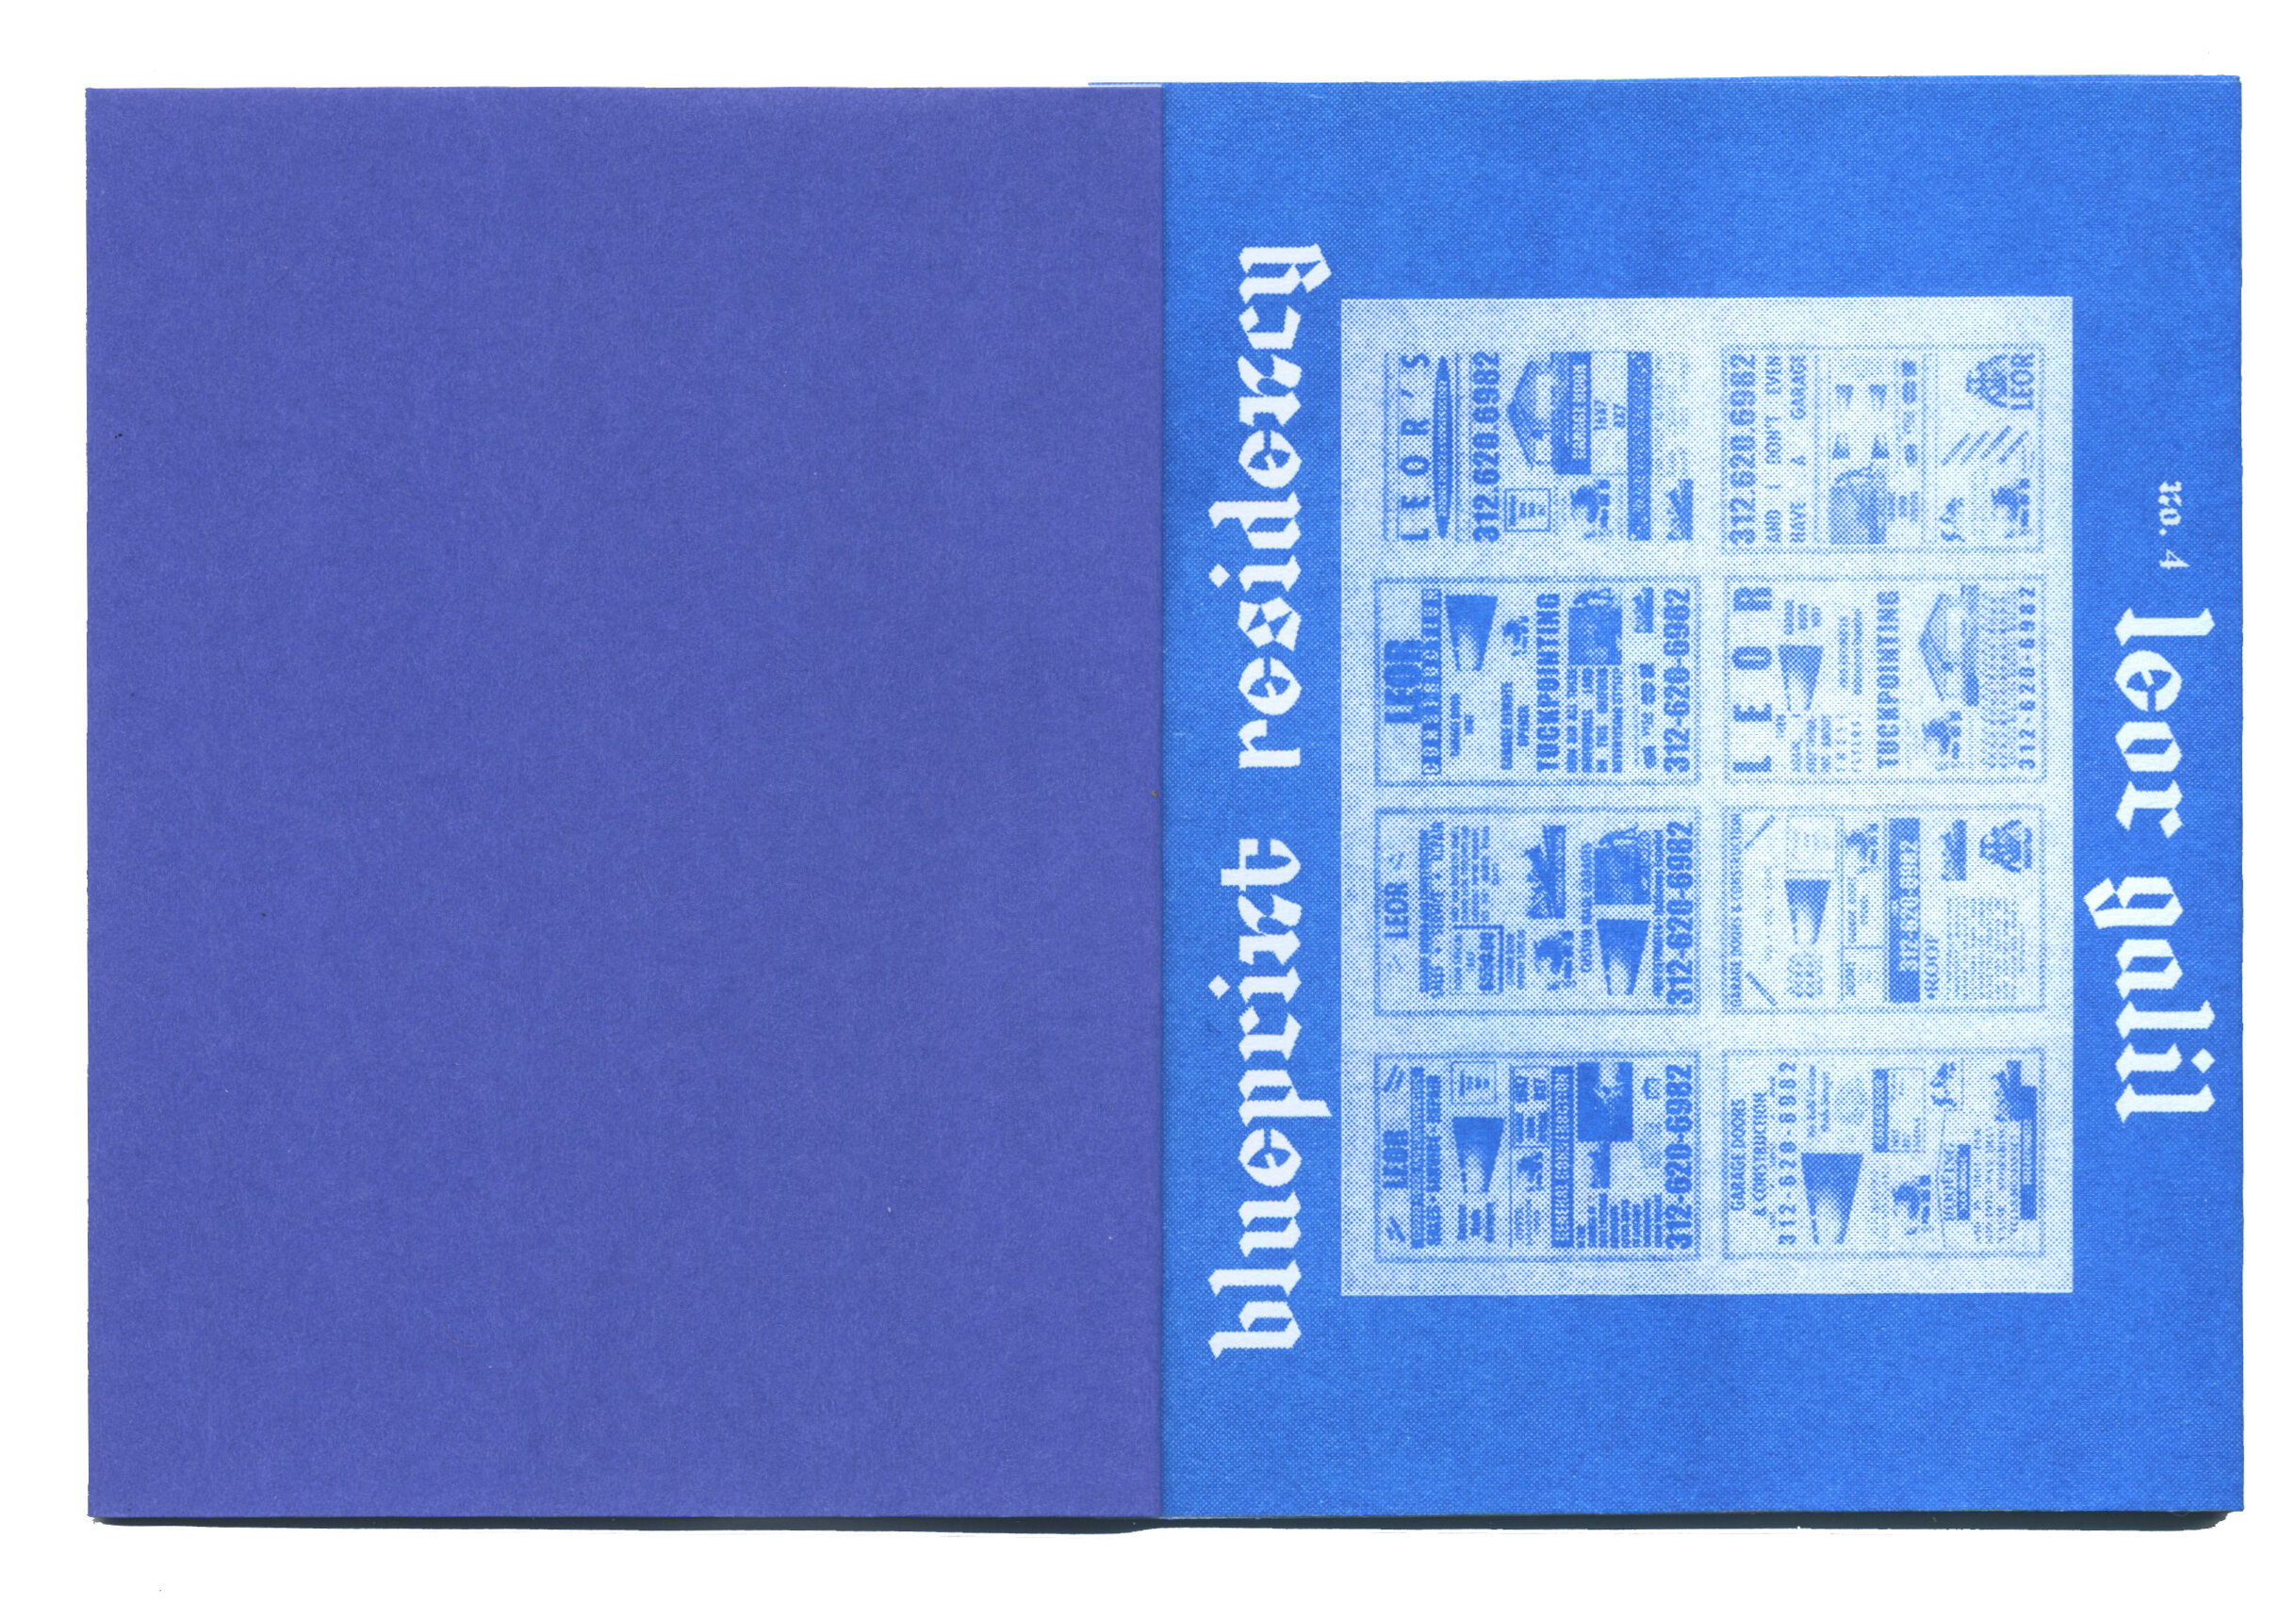 Blueprint Residency Book Leor layers cropped 2.jpg